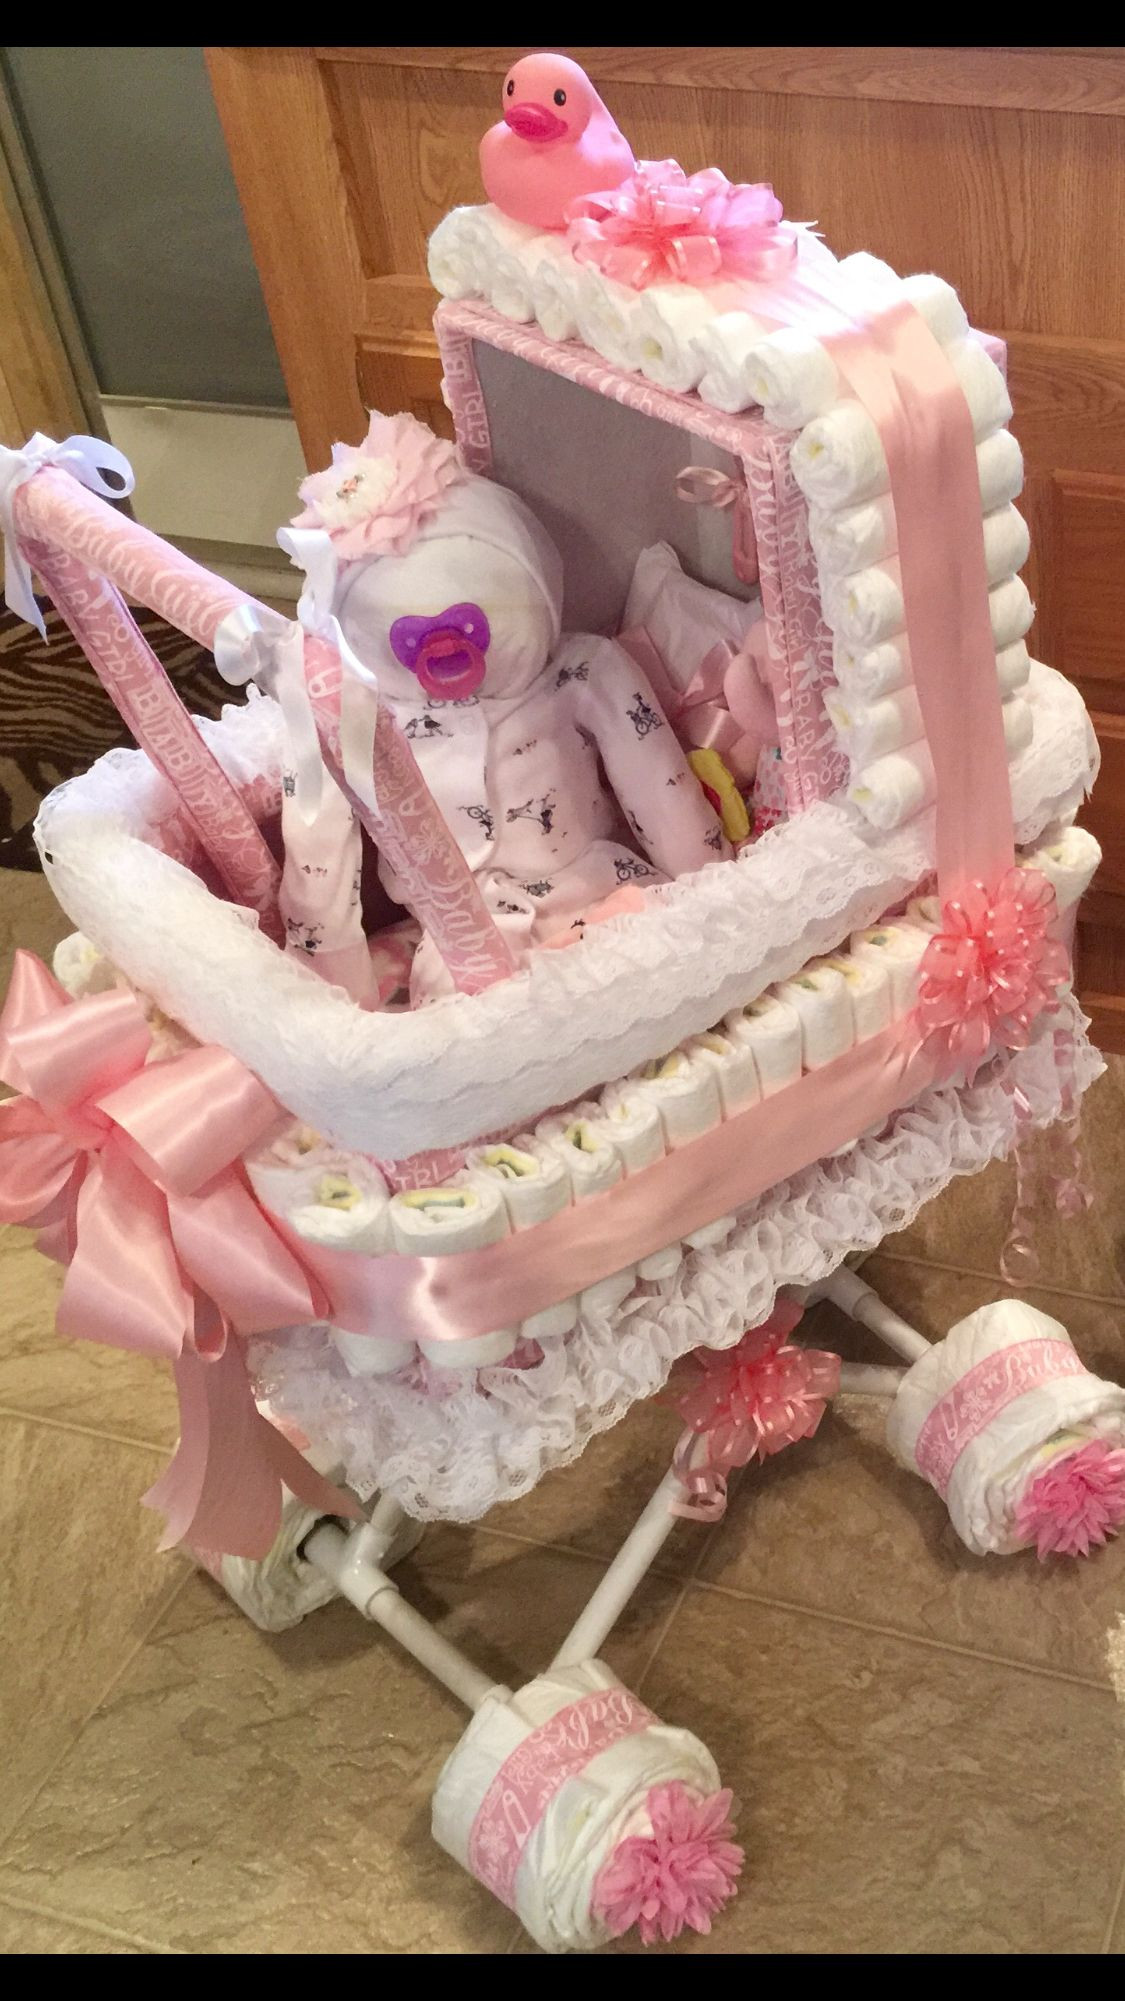 Baby Shower Gifts Made From Diapers
 Instead of a diaper cake for baby shower I made my